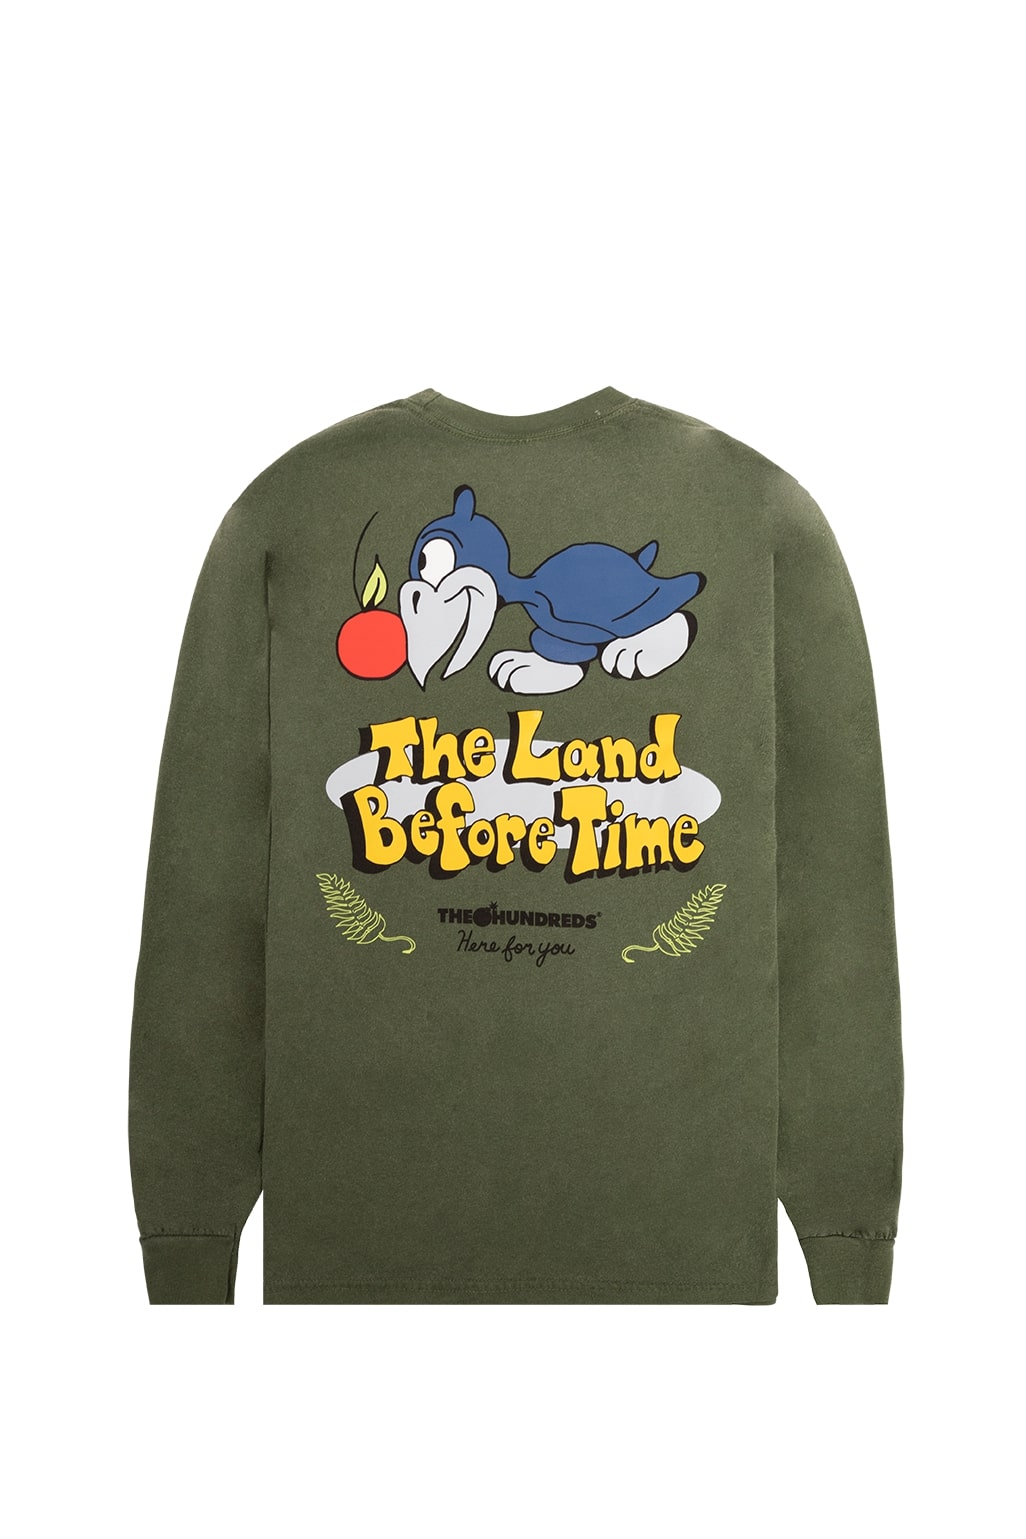 The Hundreds x Land Before Time dino friends long sleeve tee